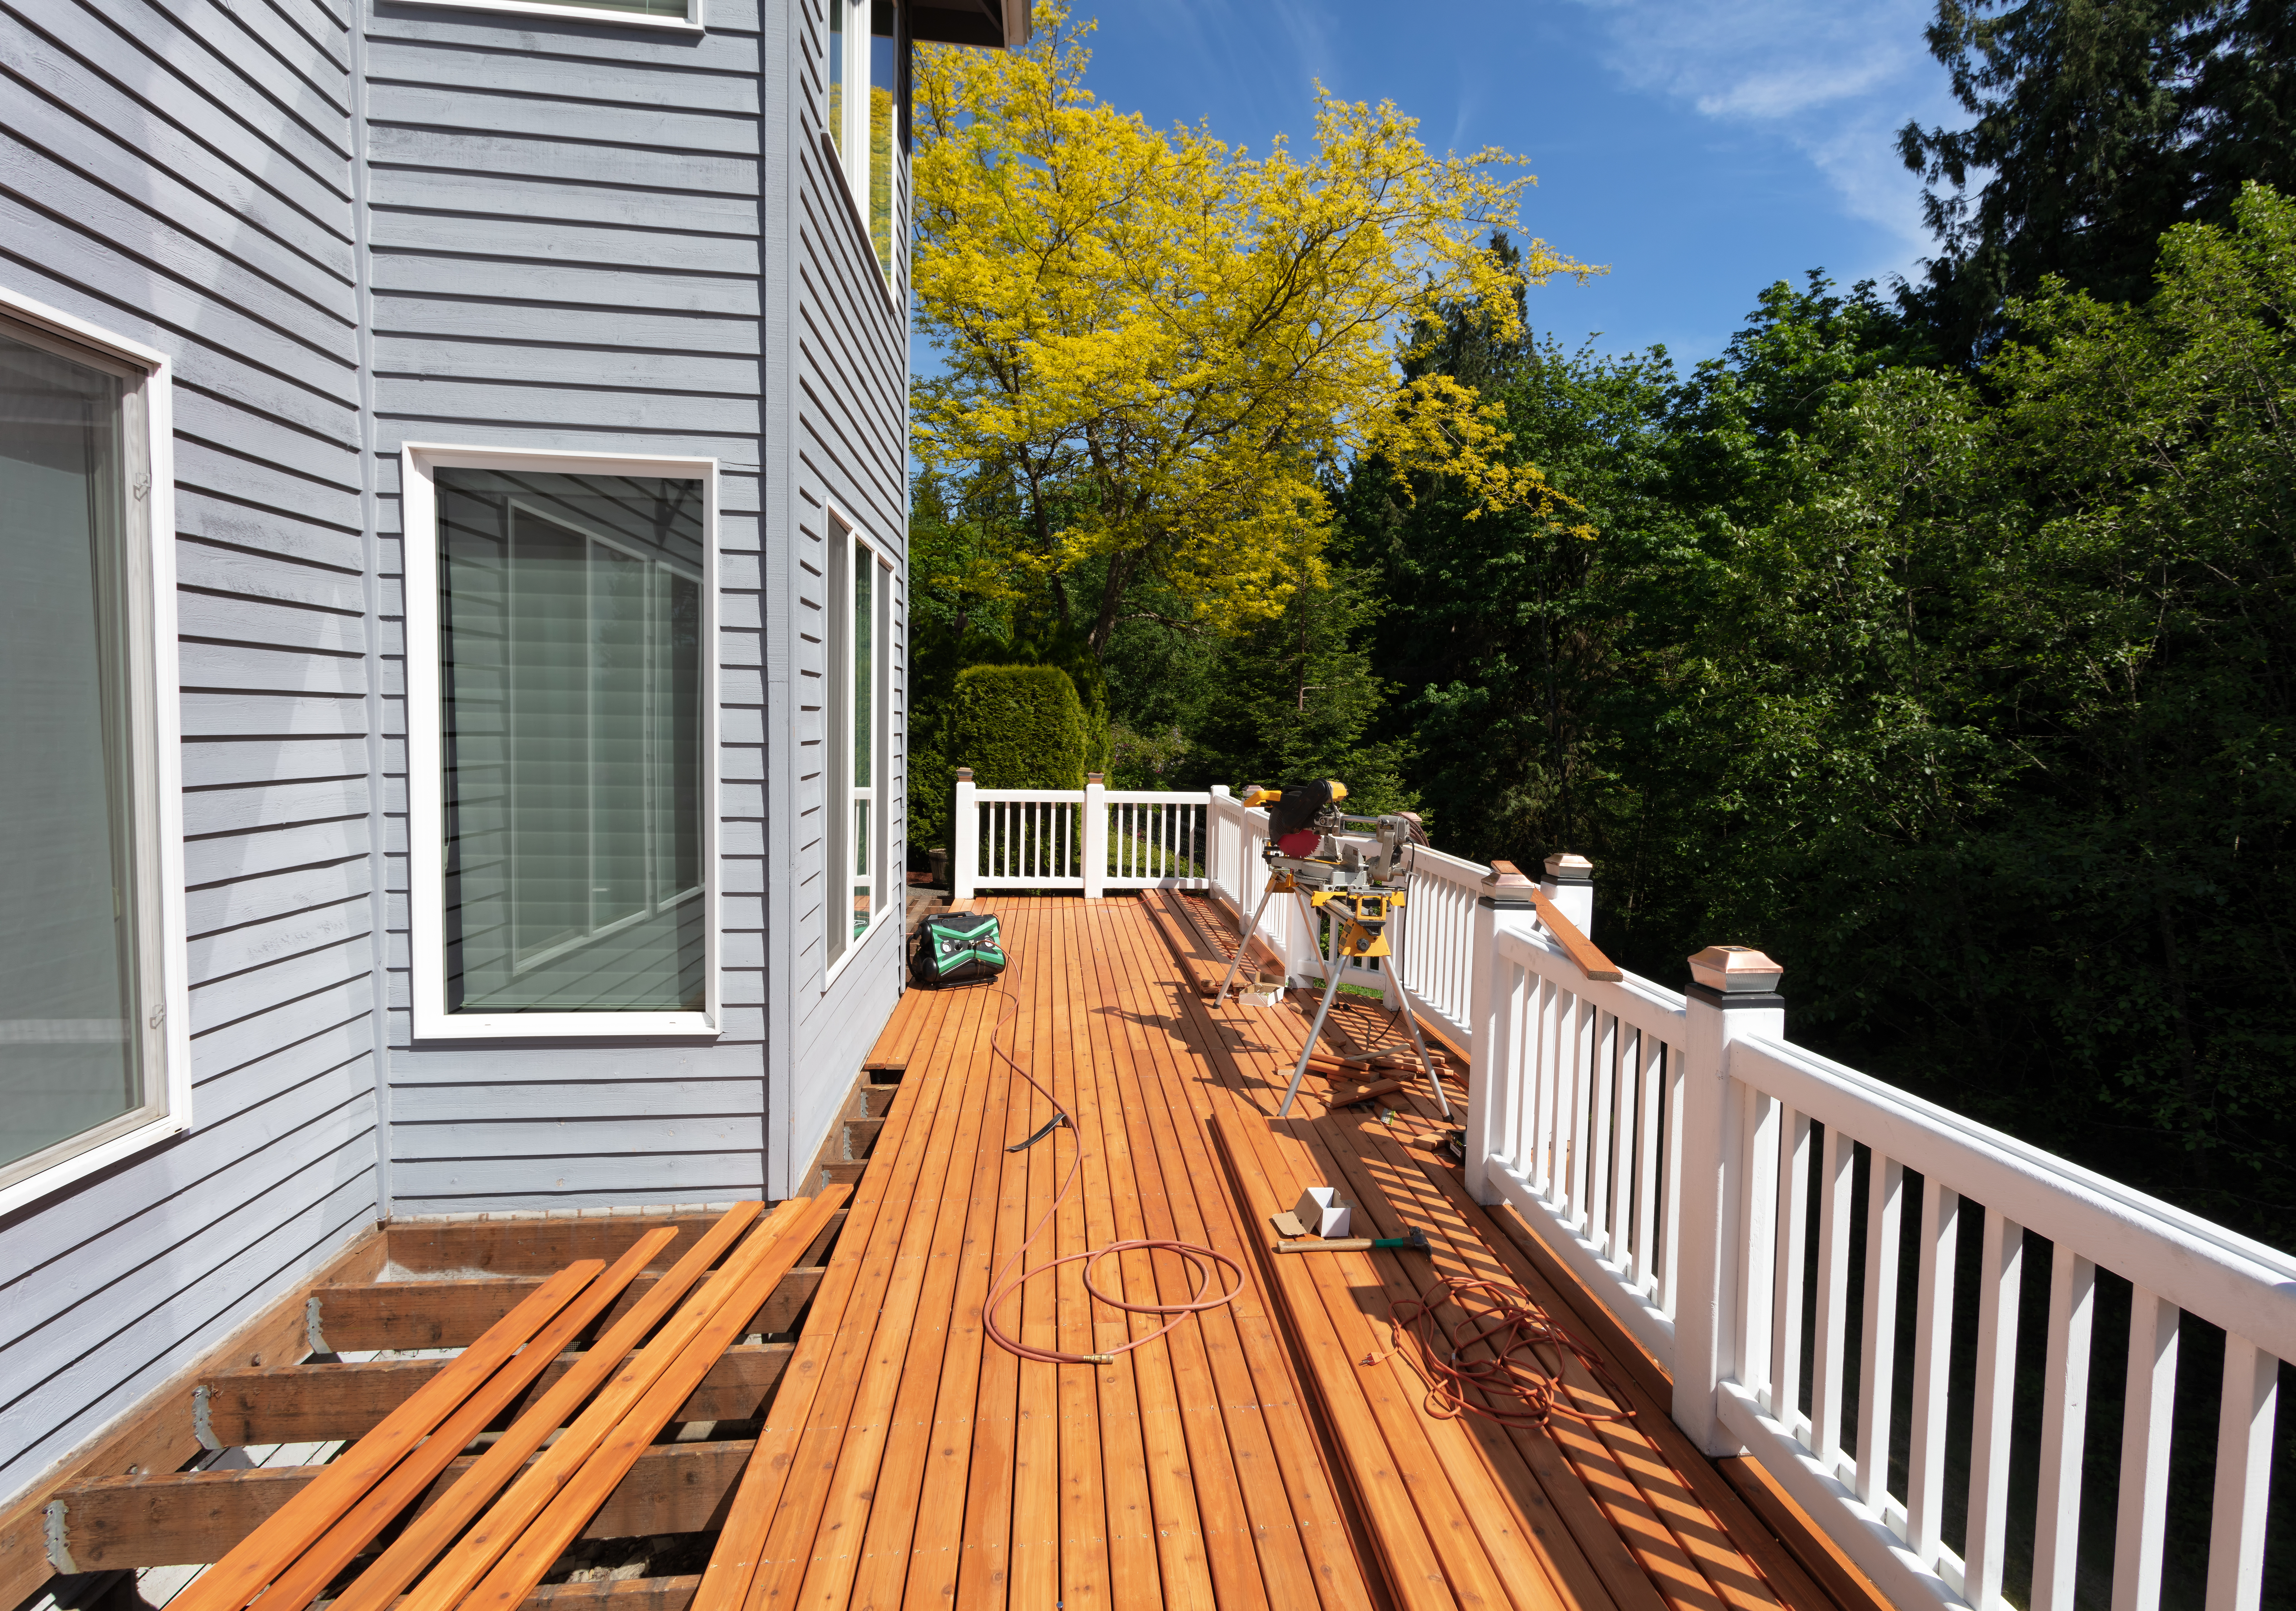 Outdoor red wooden cedar deck being remodeled with new floor boards freshly installed